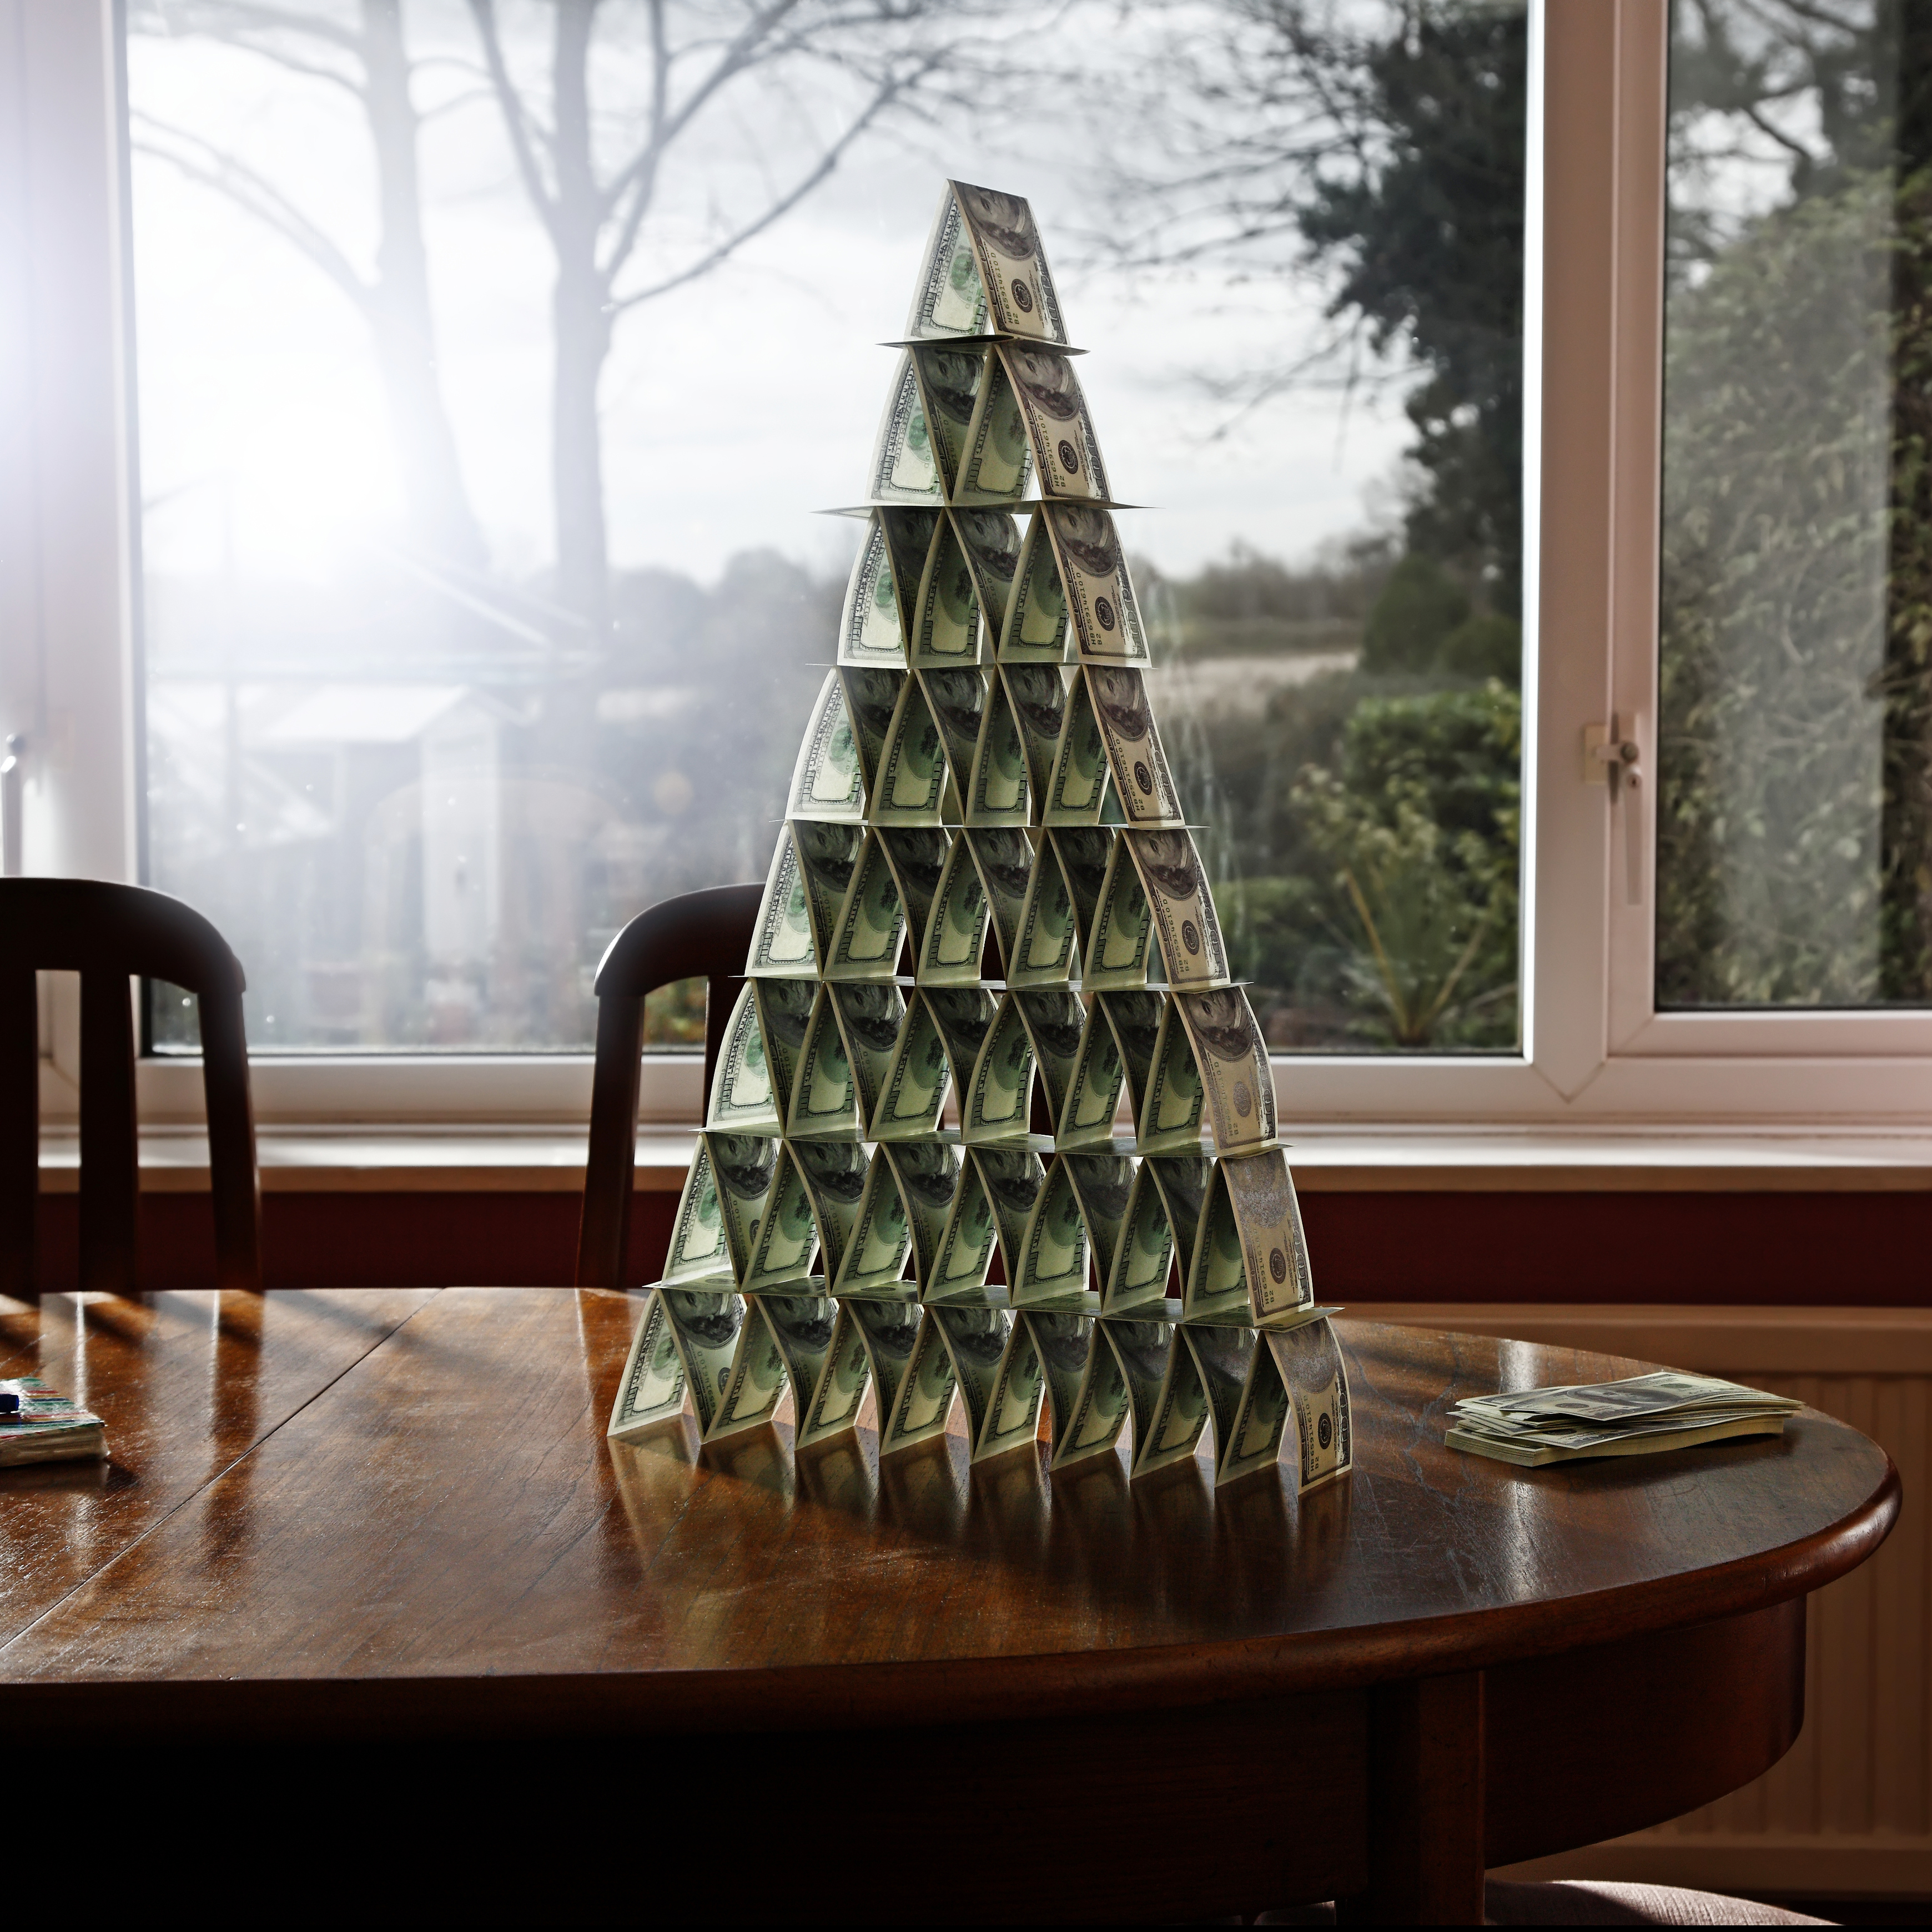 pyramid of money on table